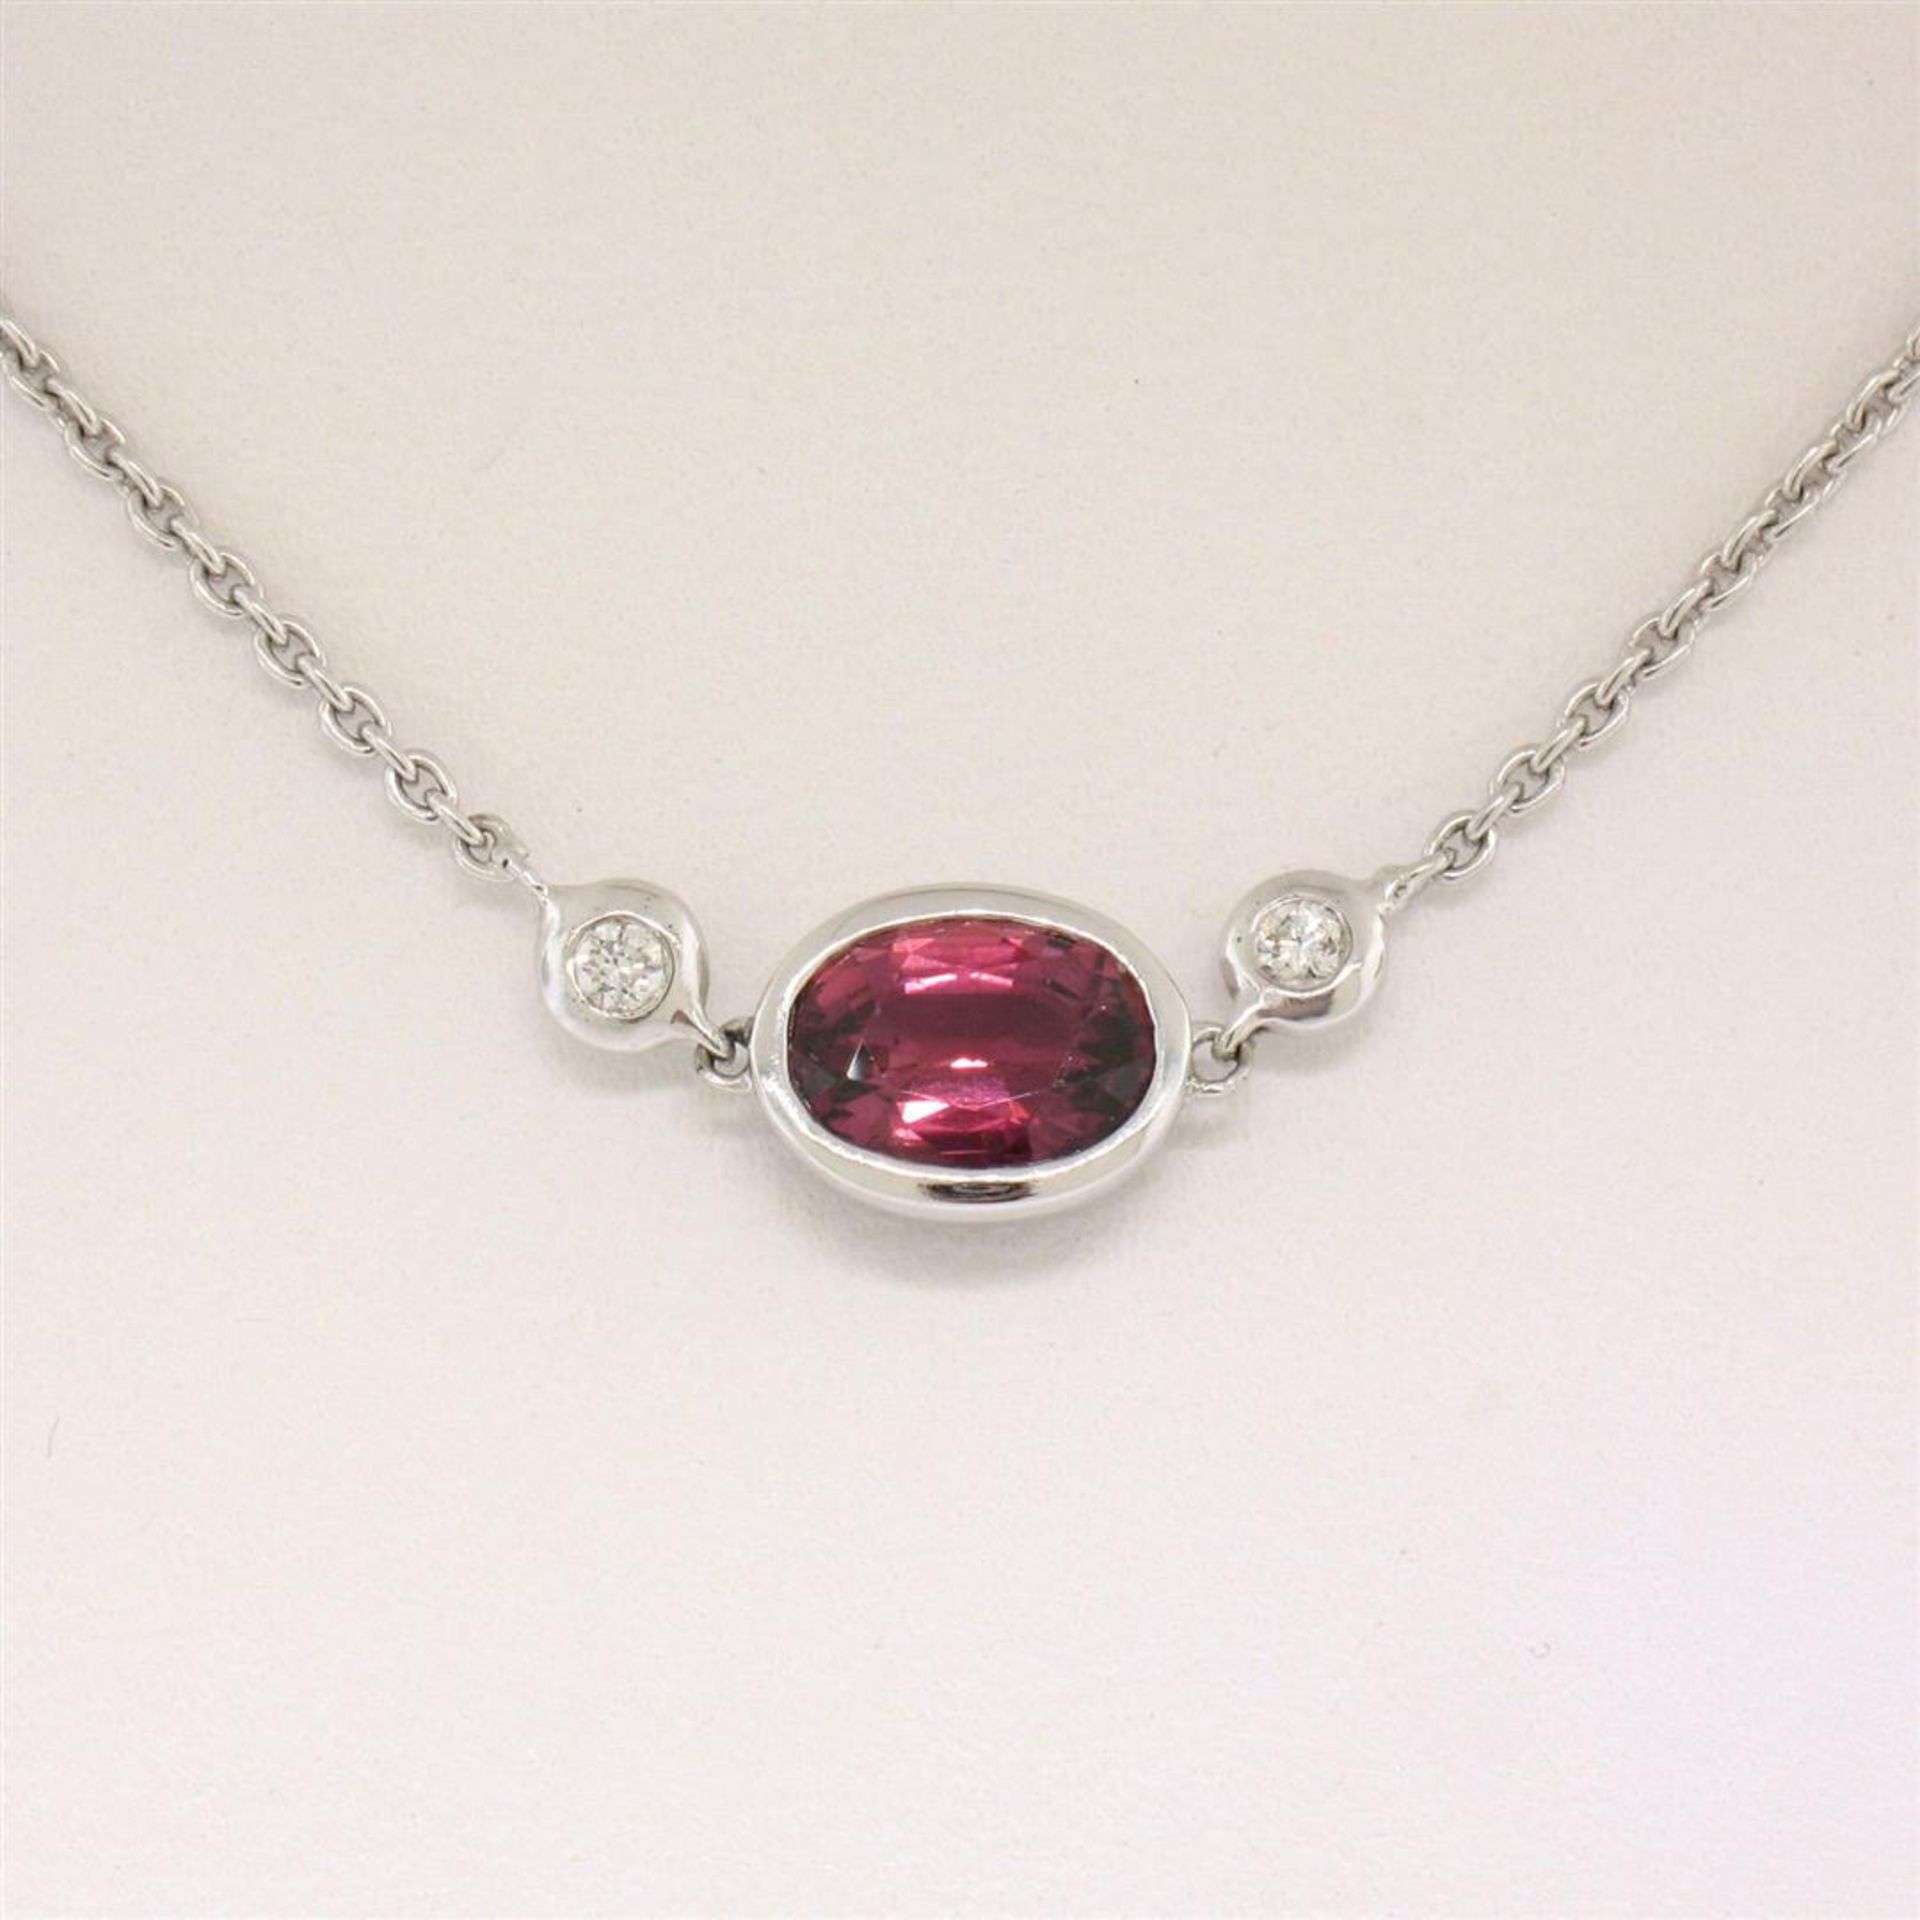 New 18kt White Gold 1.13 ctw GIA Pink Sapphire and Diamond Pendant Necklace - Image 2 of 9